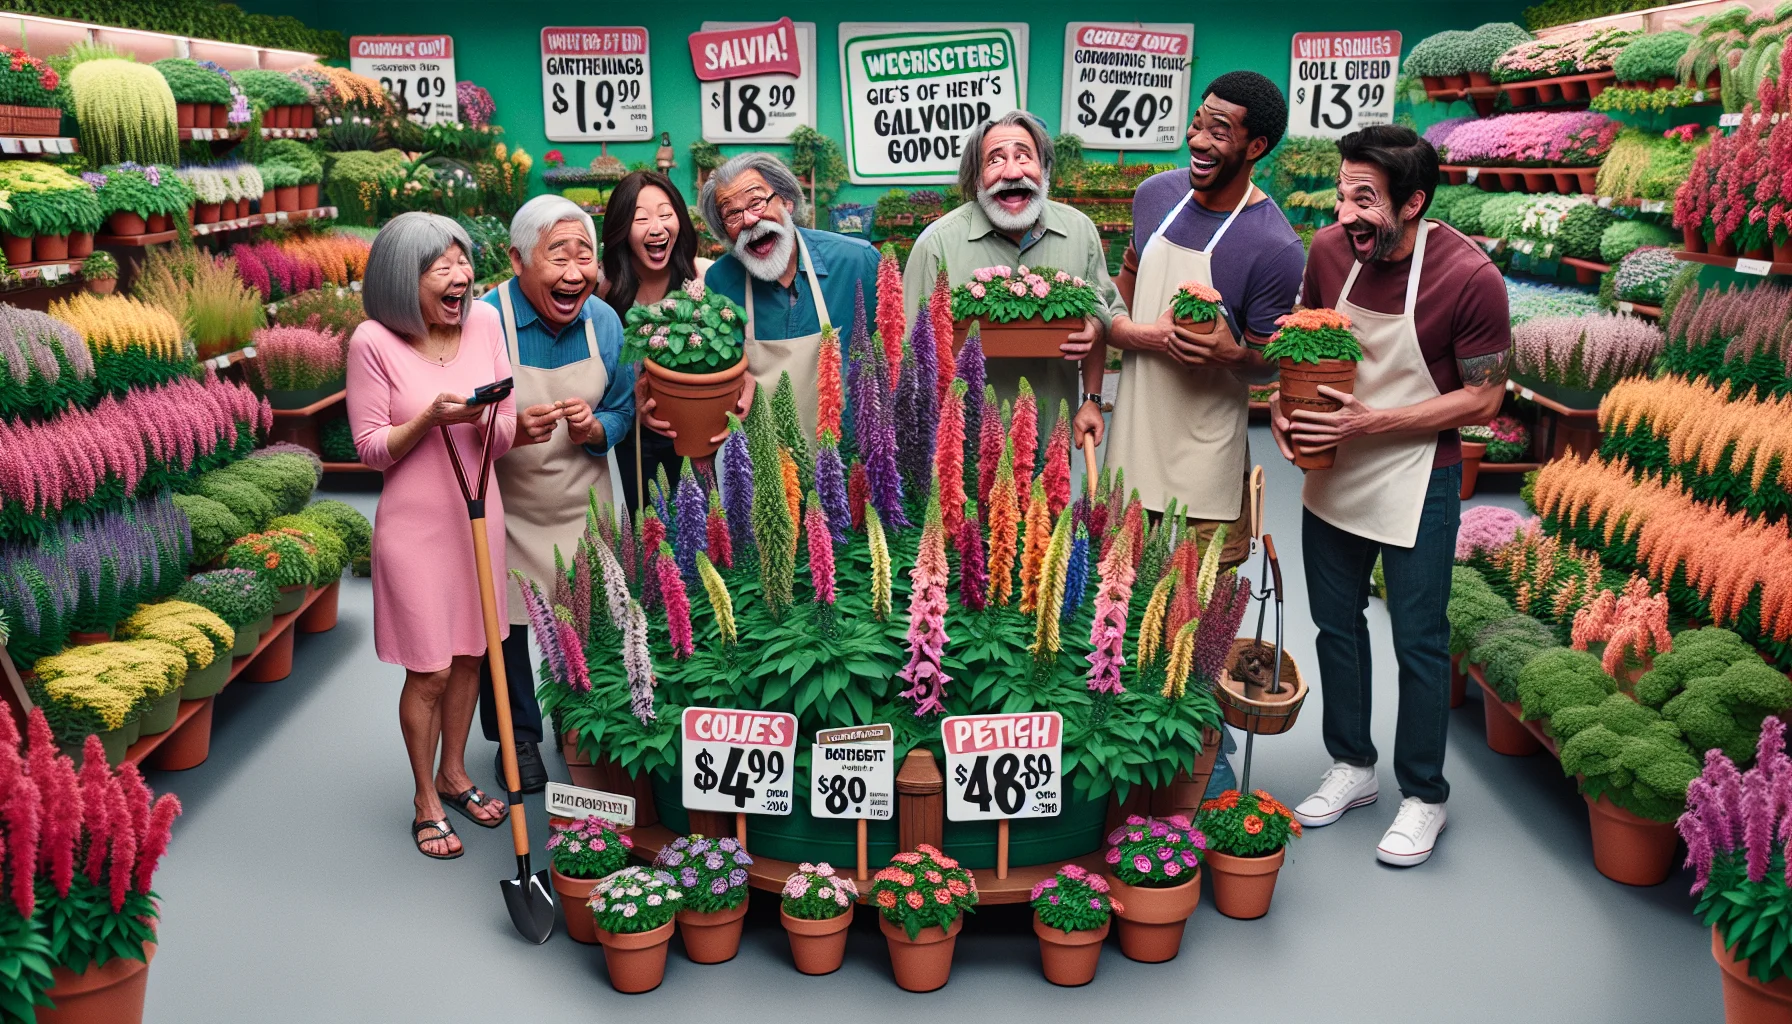 Show an amusing and lively scenario at a gardening store. The centerpiece is a vibrant, abundant display of Salvia plants in diverse varieties and colors, complete with clever price tags and funny signage about their benefits. Patrons of different ages, genders, and descents - including an elderly South Asian man, a young Hispanic woman, a middle-aged Black man, and a teenage Caucasian girl - are seen being irresistibly drawn to the Salvia. Their expressions of delight and surprise, coupled with gardening tools and flowerpots in their hands, mirror a newfound love for gardening.